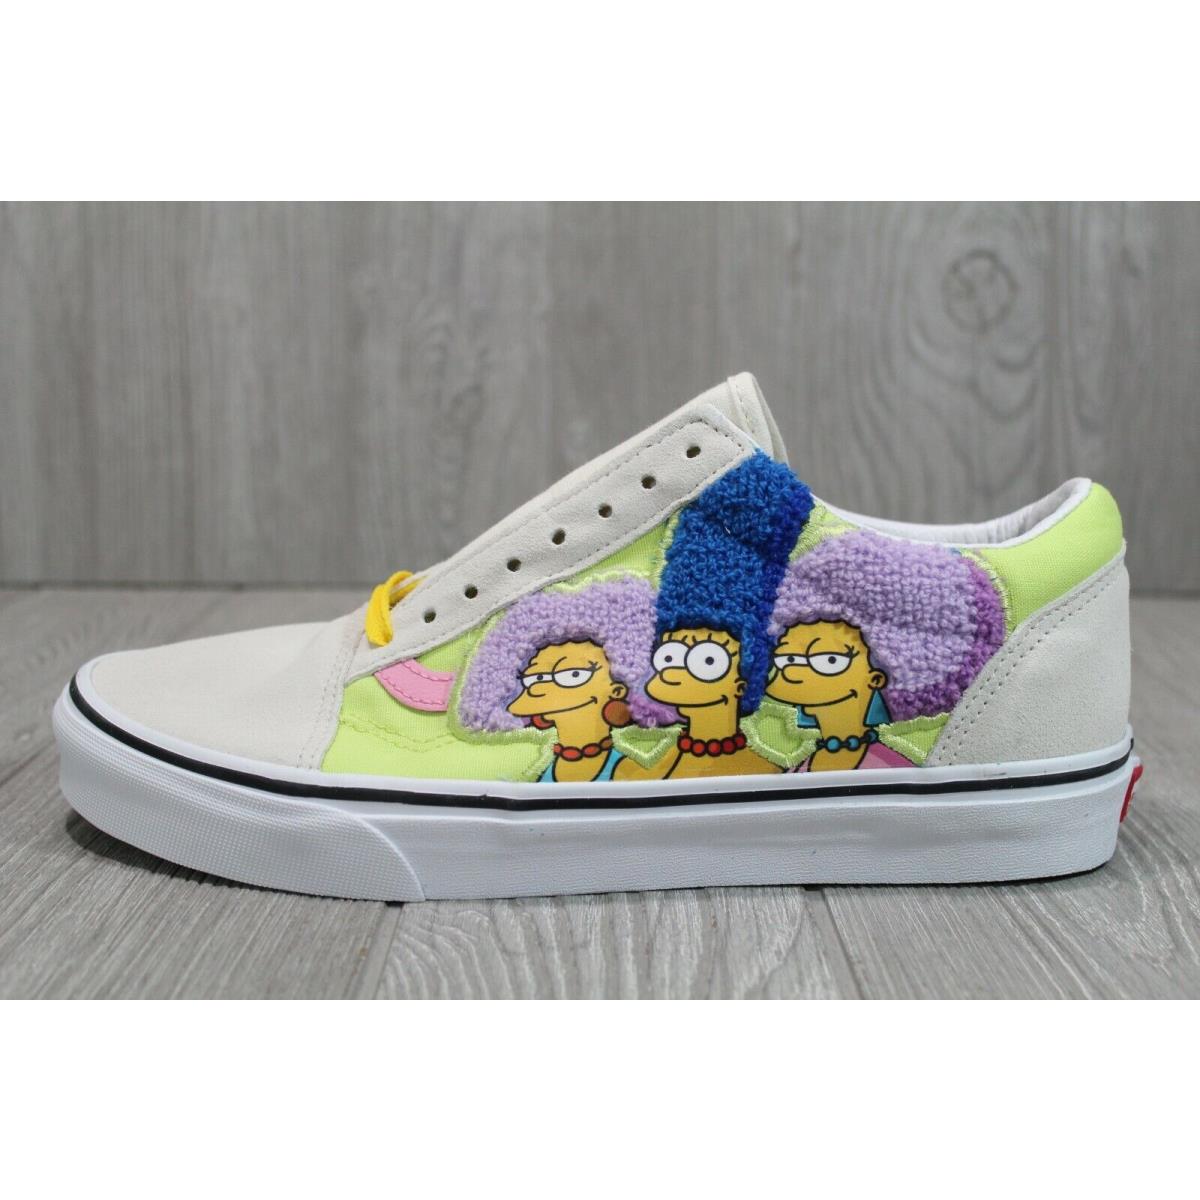 57 Rare Vans x Old Skool The Simpsons The Bouviers Shoes Mens Sizes 4 -11.5